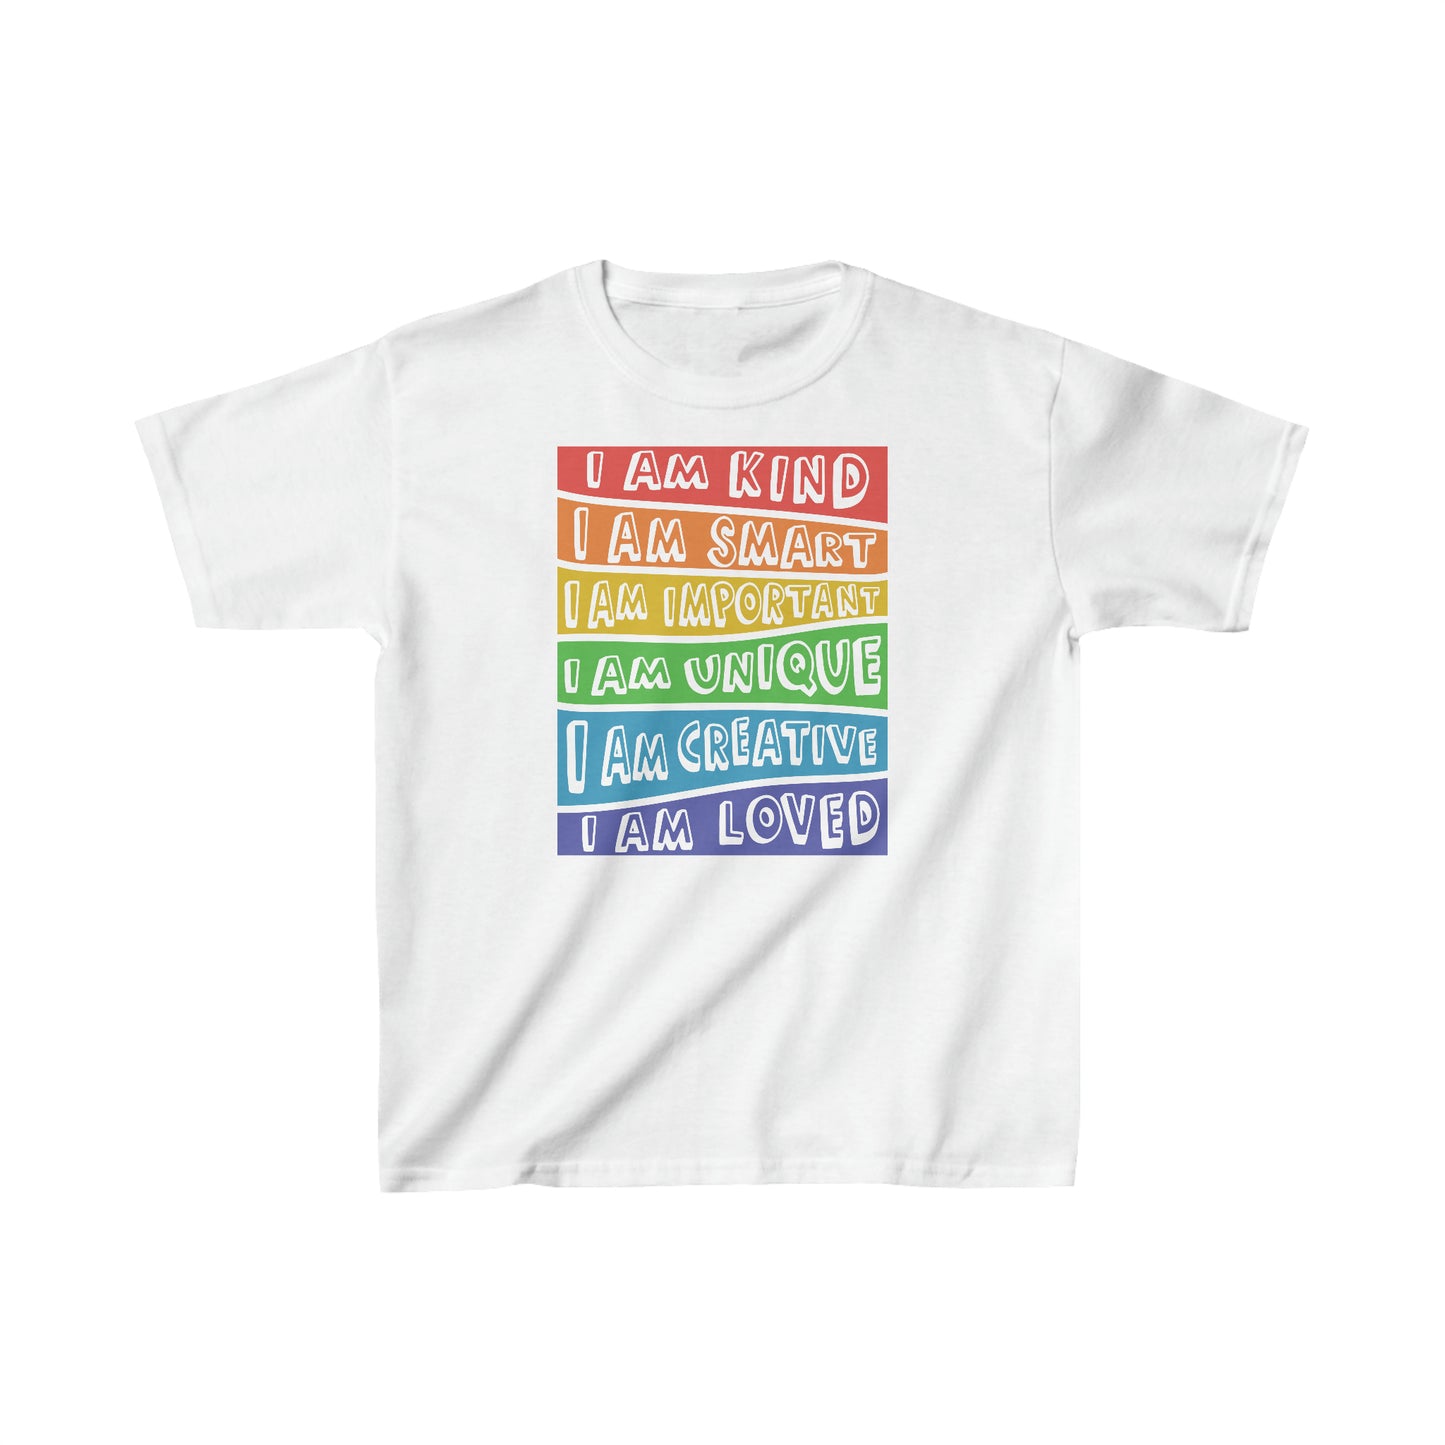 Affirmations Youth Tee